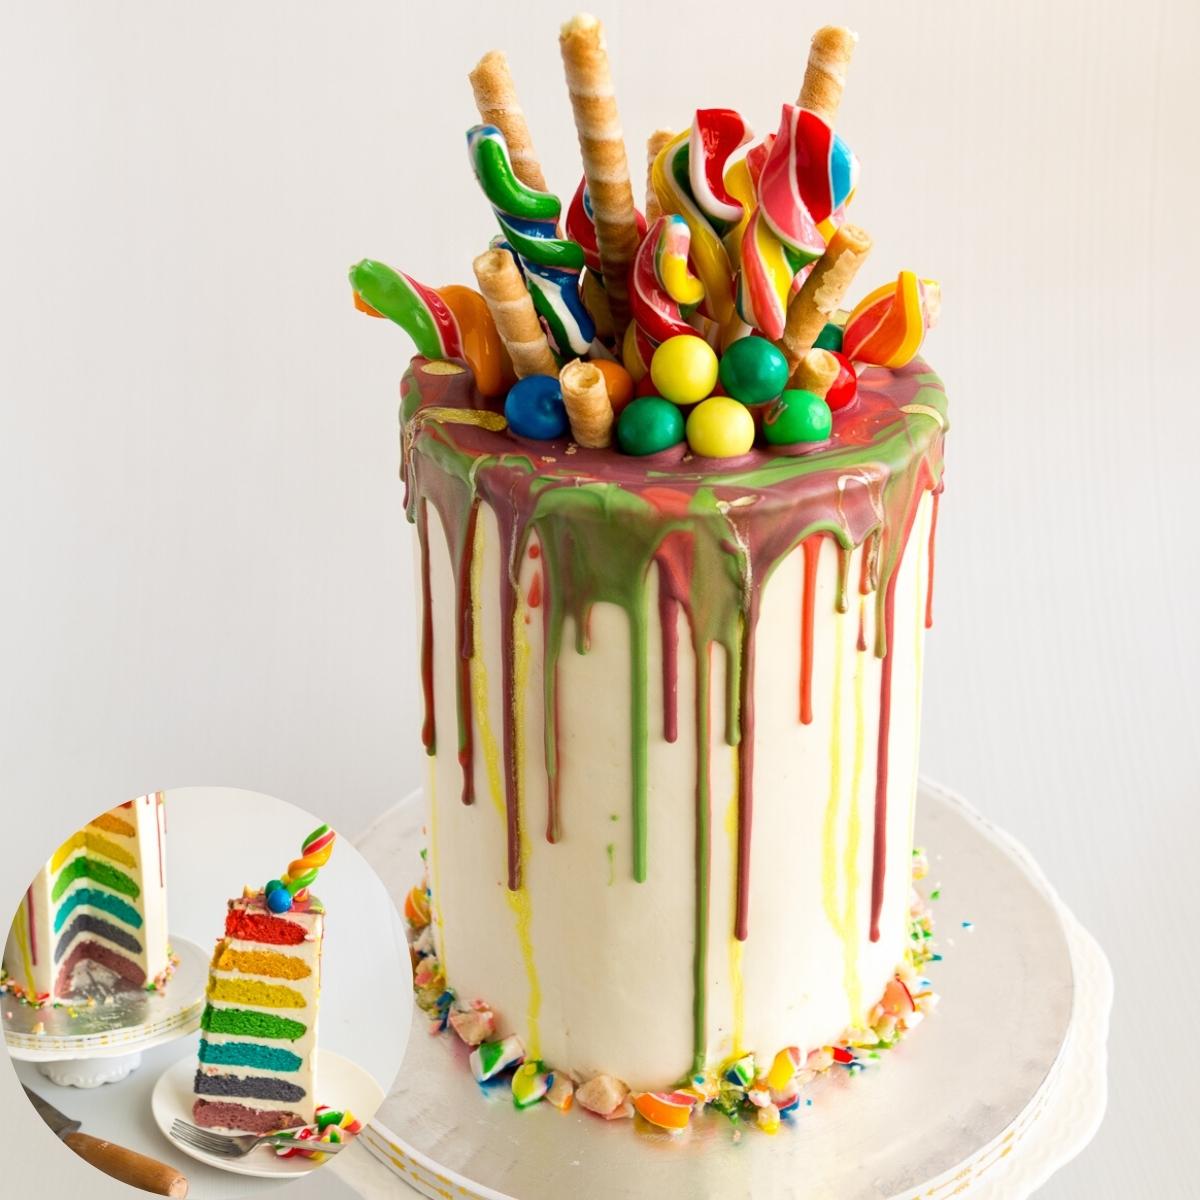 Rainbow layer cake topped with candy and wafer